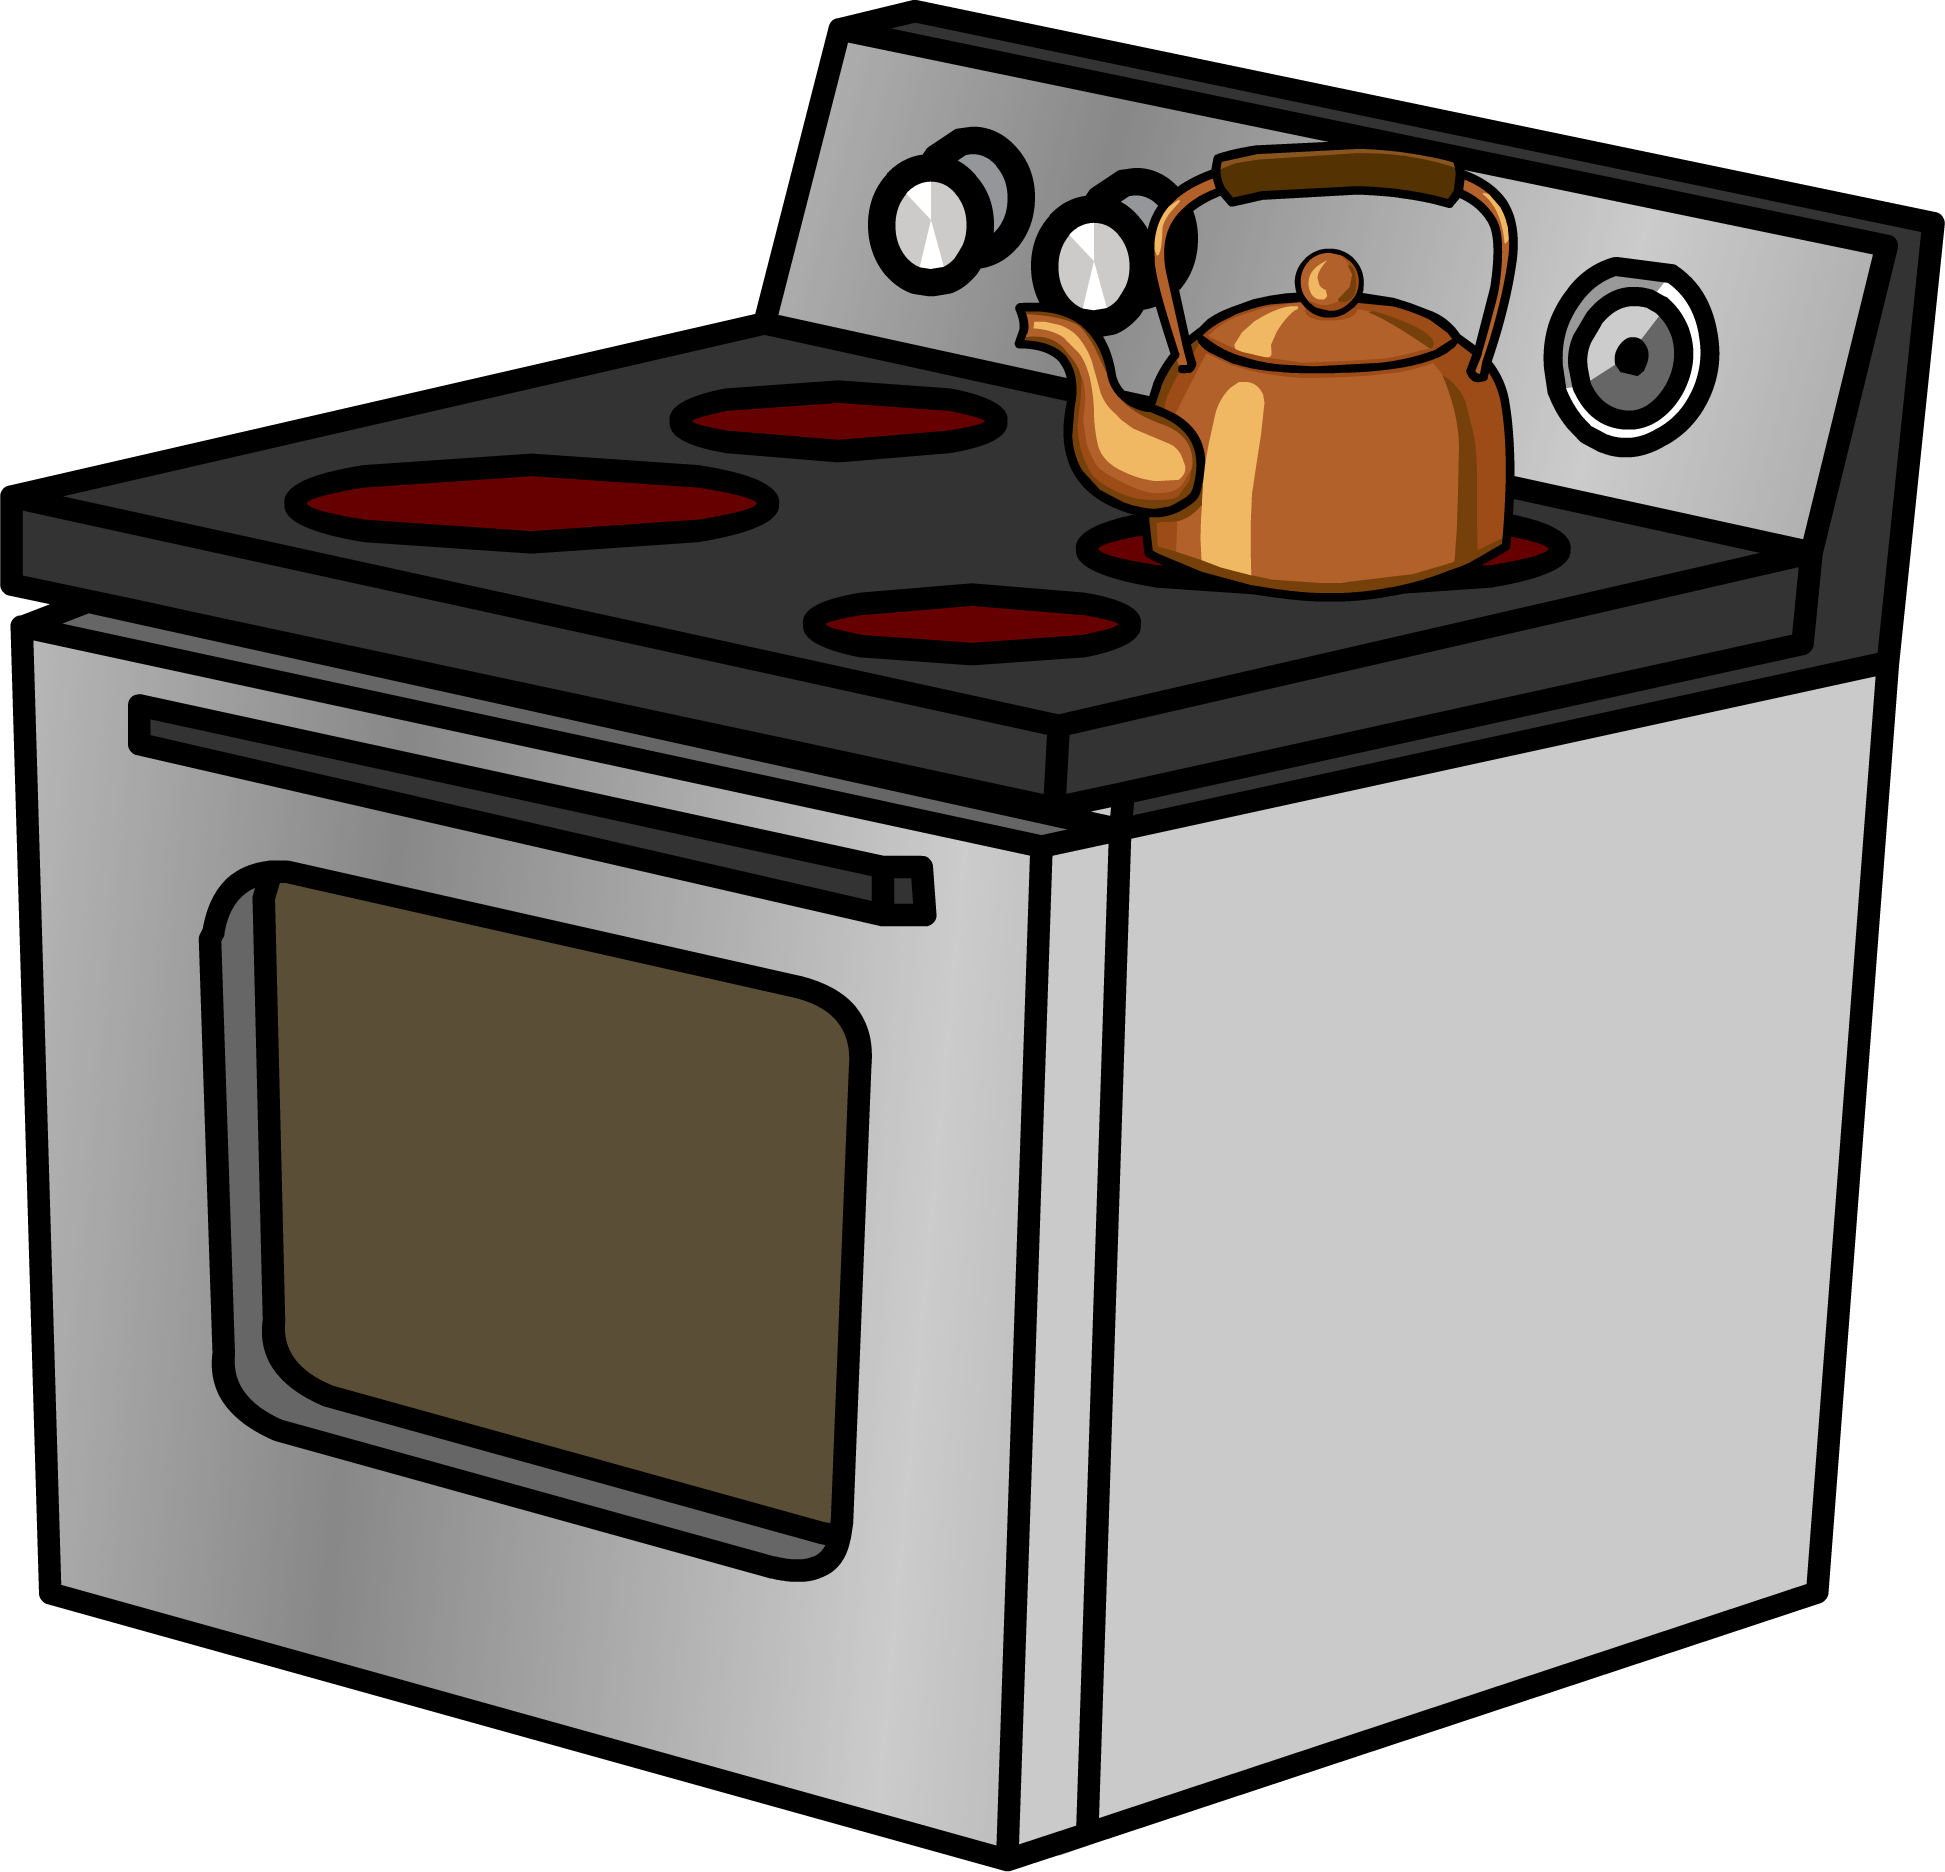 Image - Stainless Steel Stove sprite 008.png | Club ...